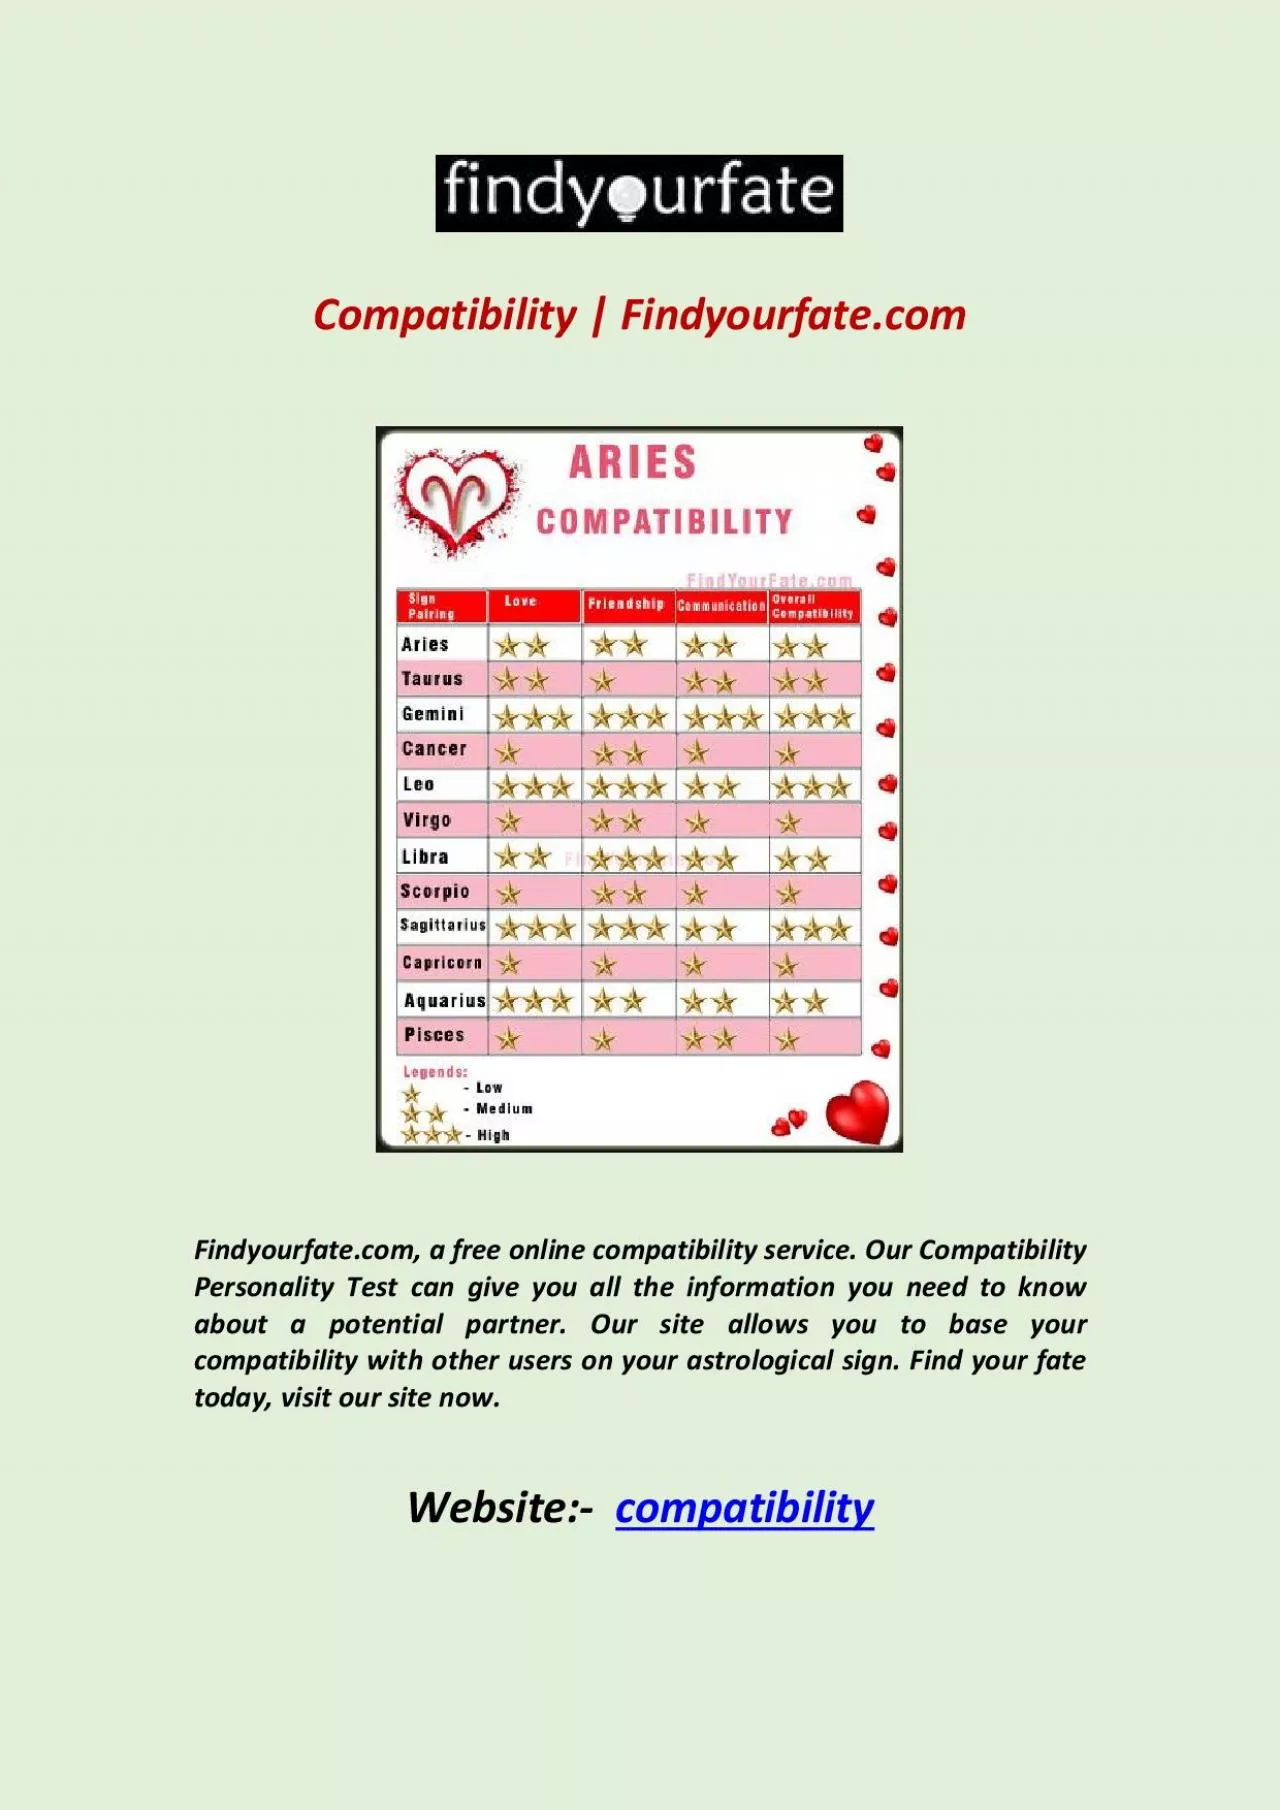 Compatibility | Findyourfate.com